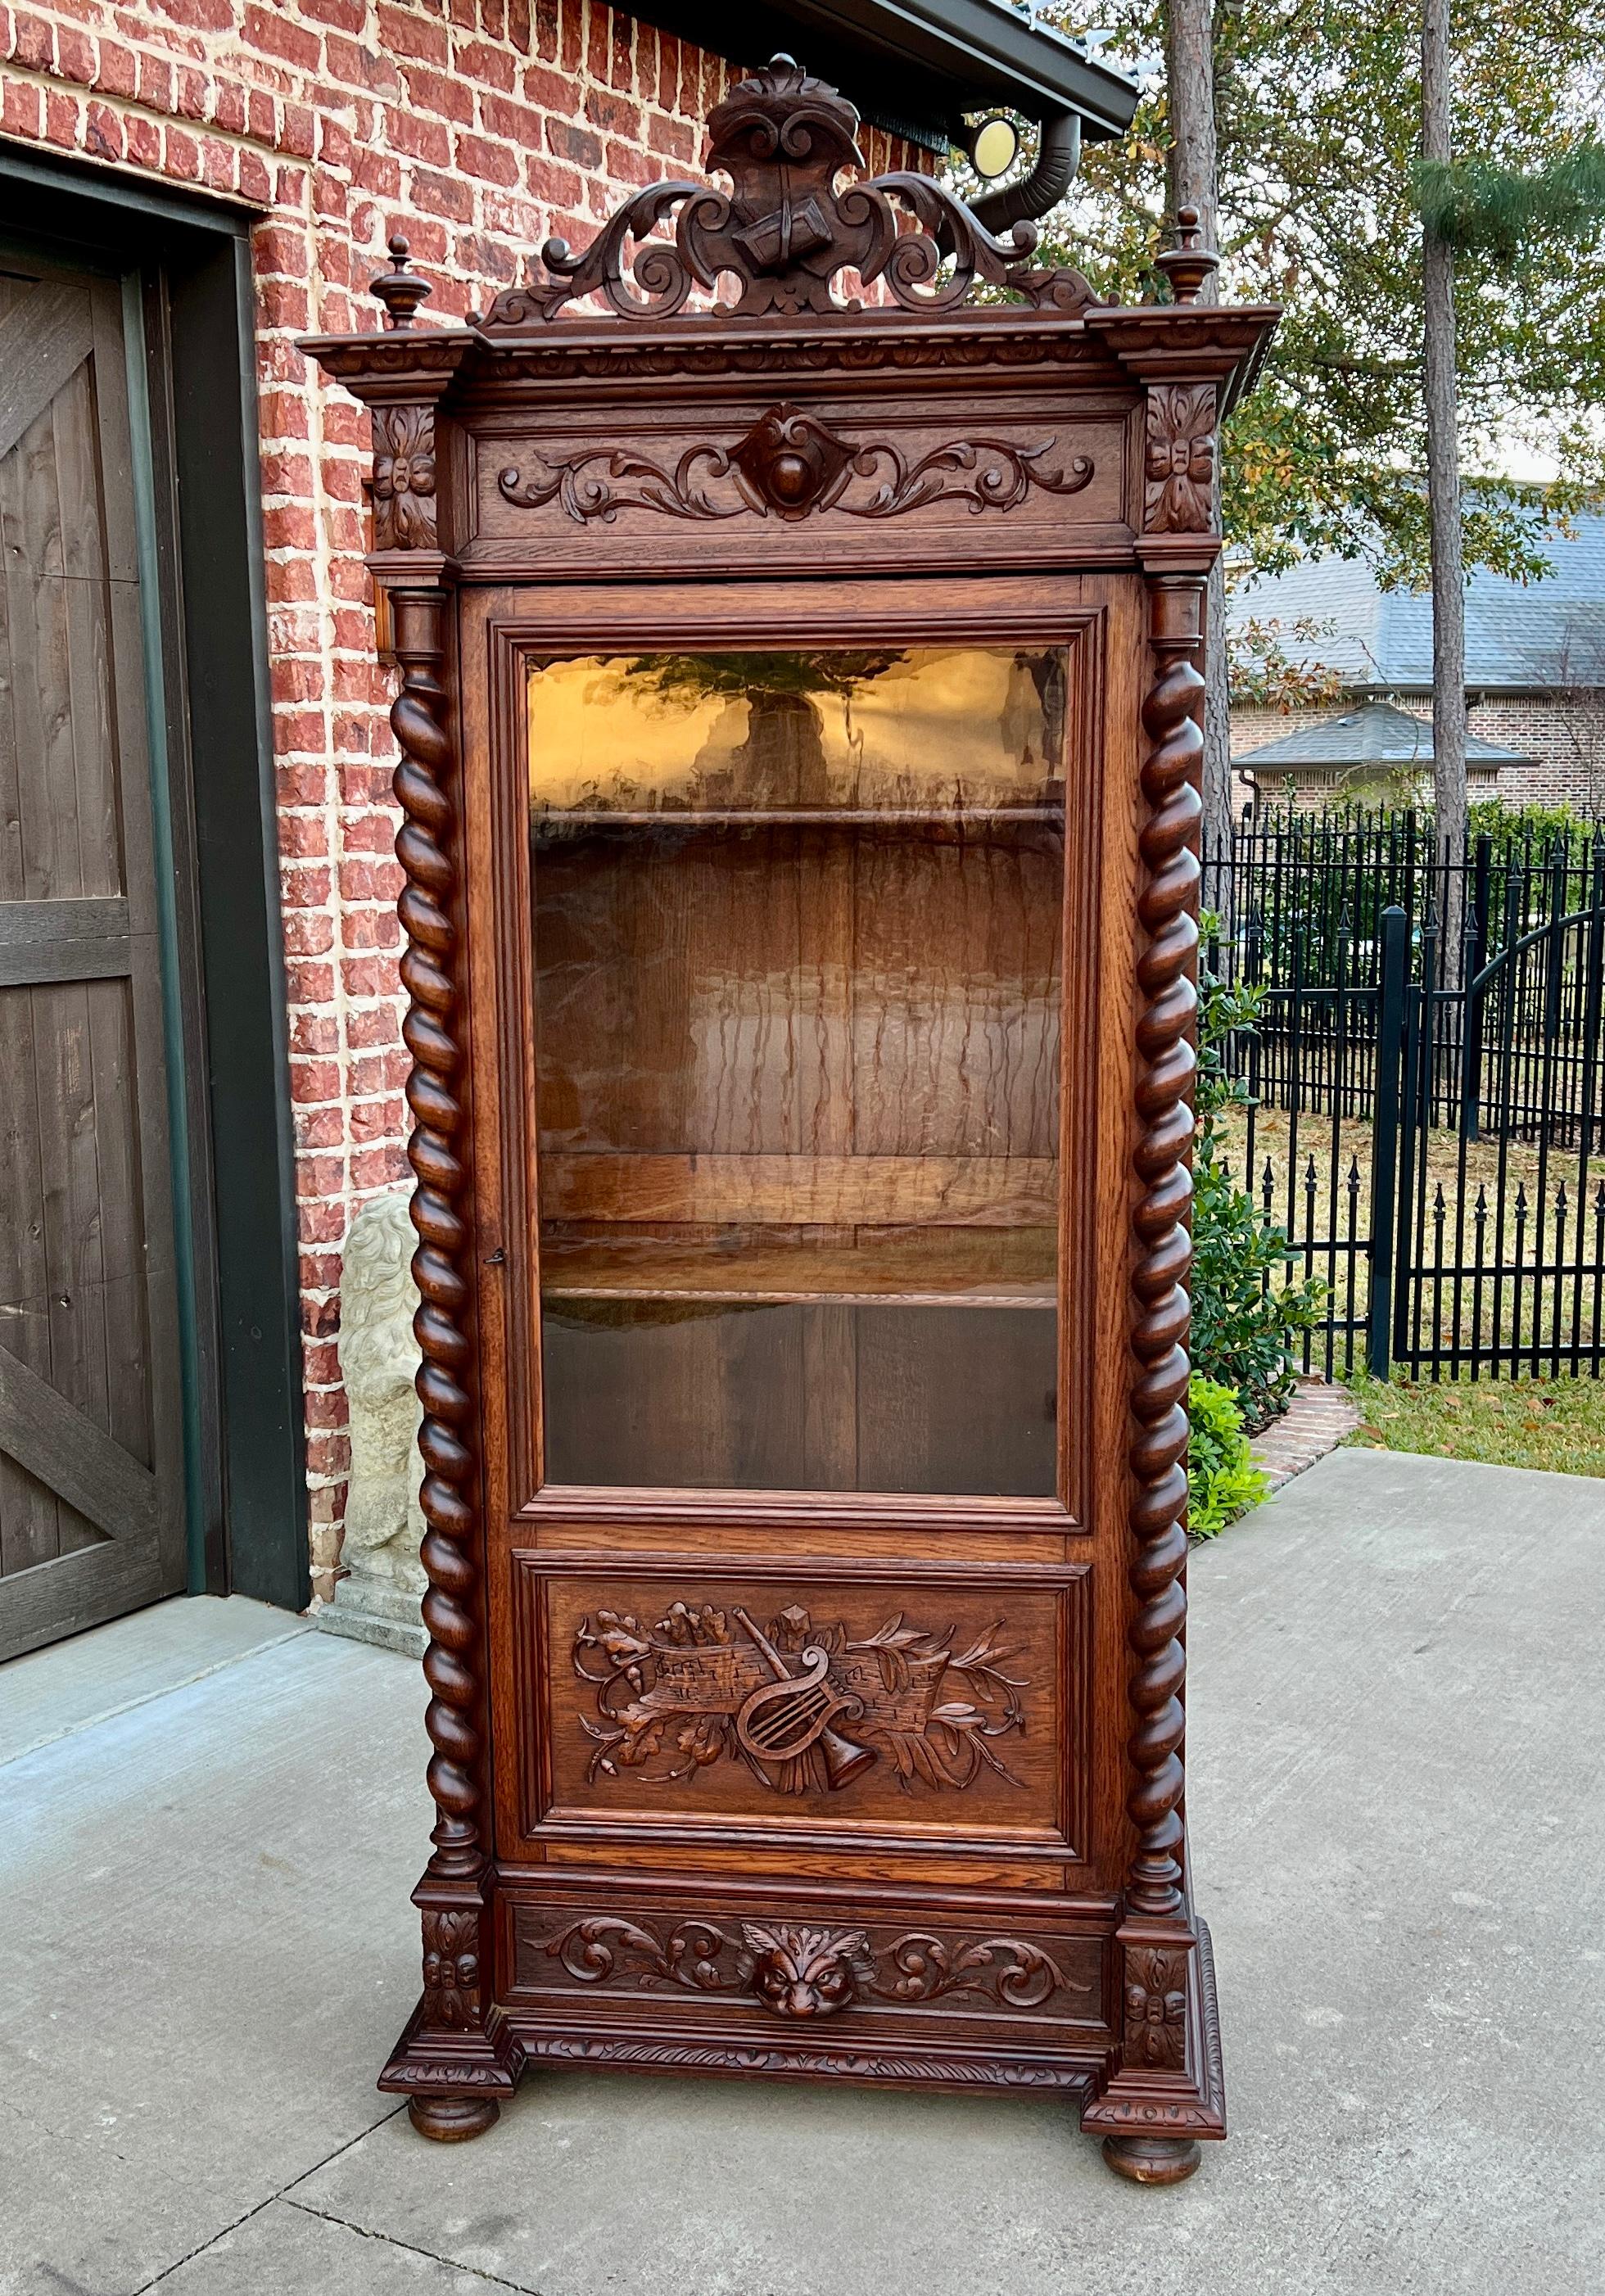     EXCEPTIONAL 19th Century Antique French Oak Renaissance Revival Barley Twist Bookcase, Display Cabinet or Scholar's Cabinet~~
    c. 1880s 

     